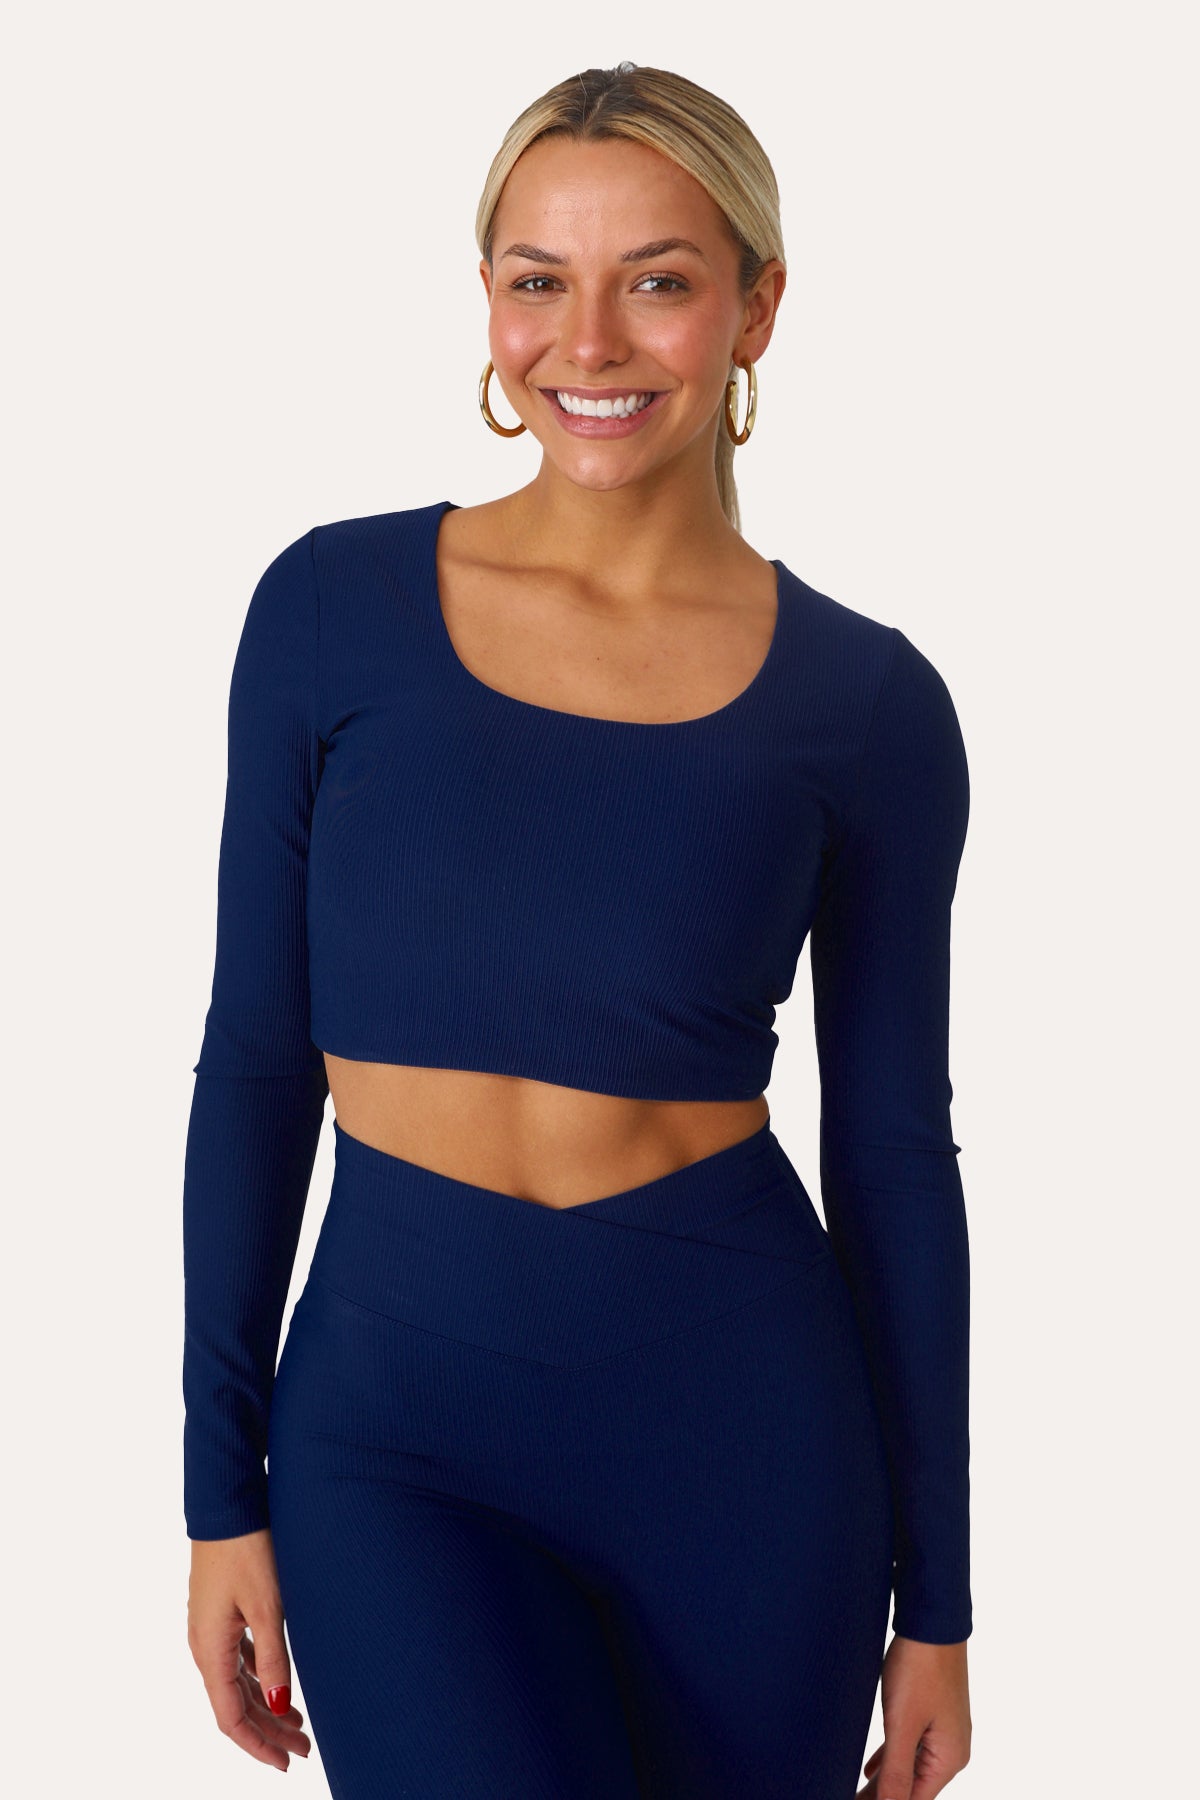 MODEL WEARING KEEP IT COOL BLUE LONG SLEEVE ACTIVE TOP